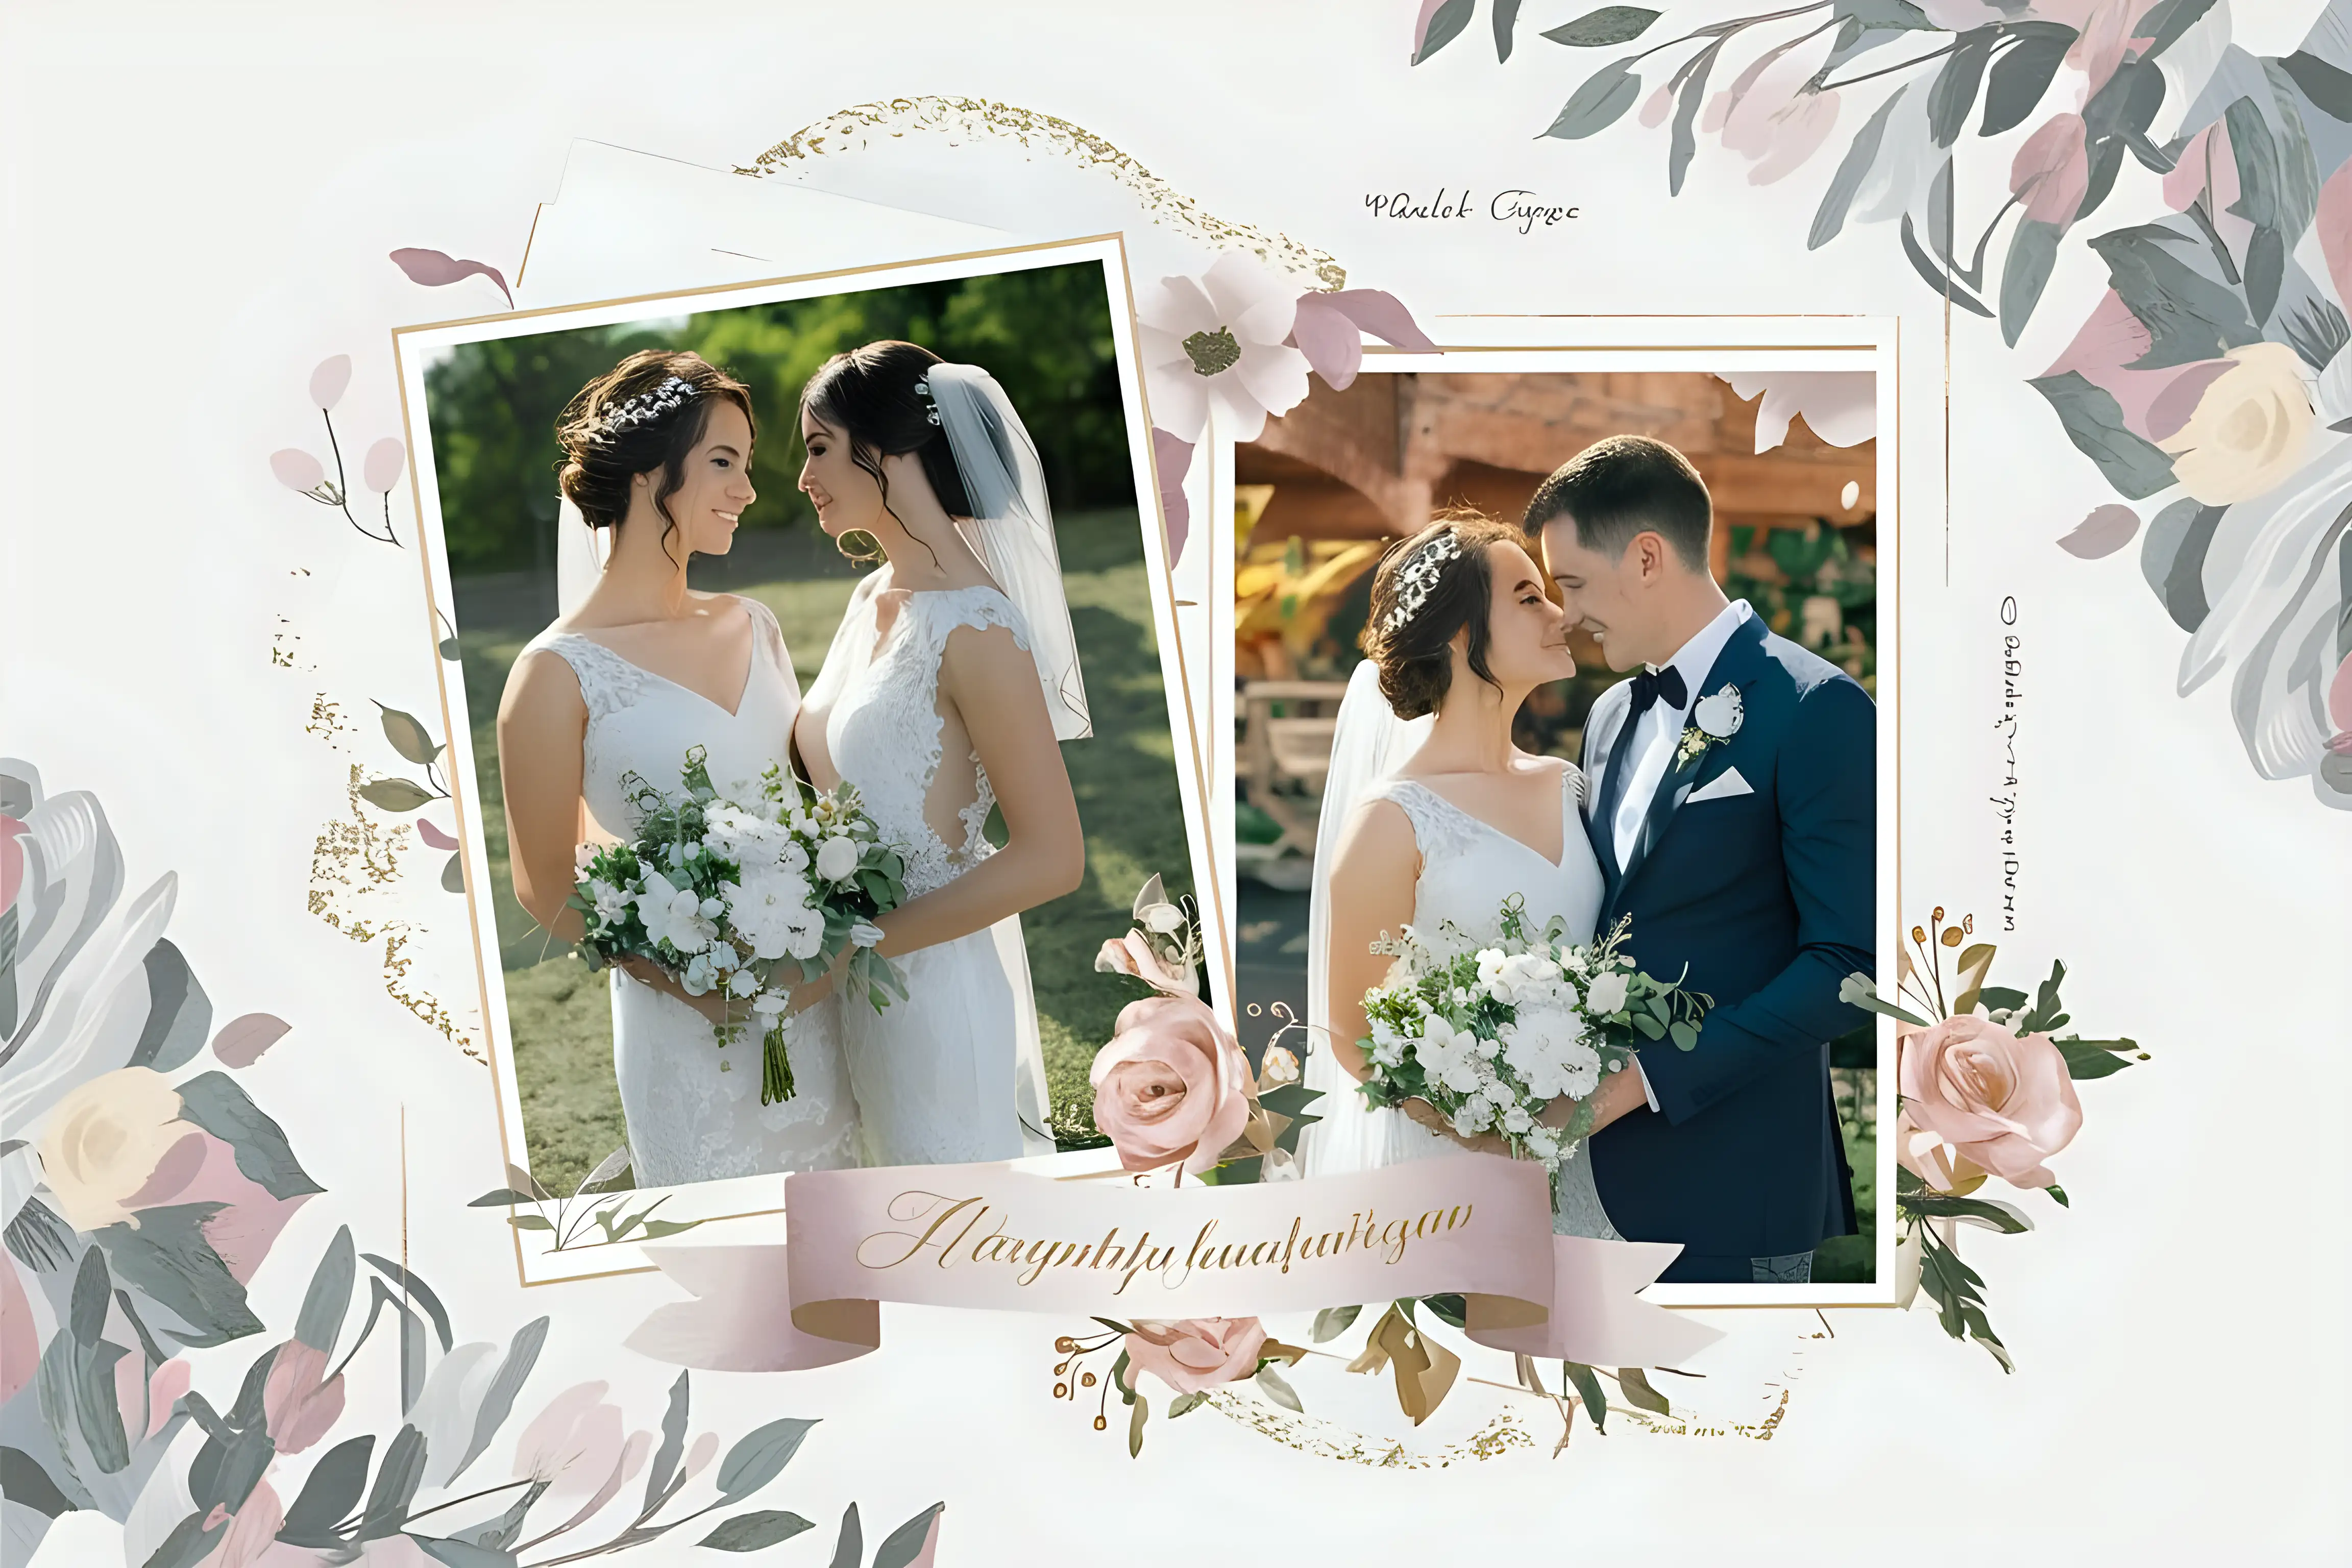 Elegant Wedding Memories Collage with Floral Borders and Romantic Palette